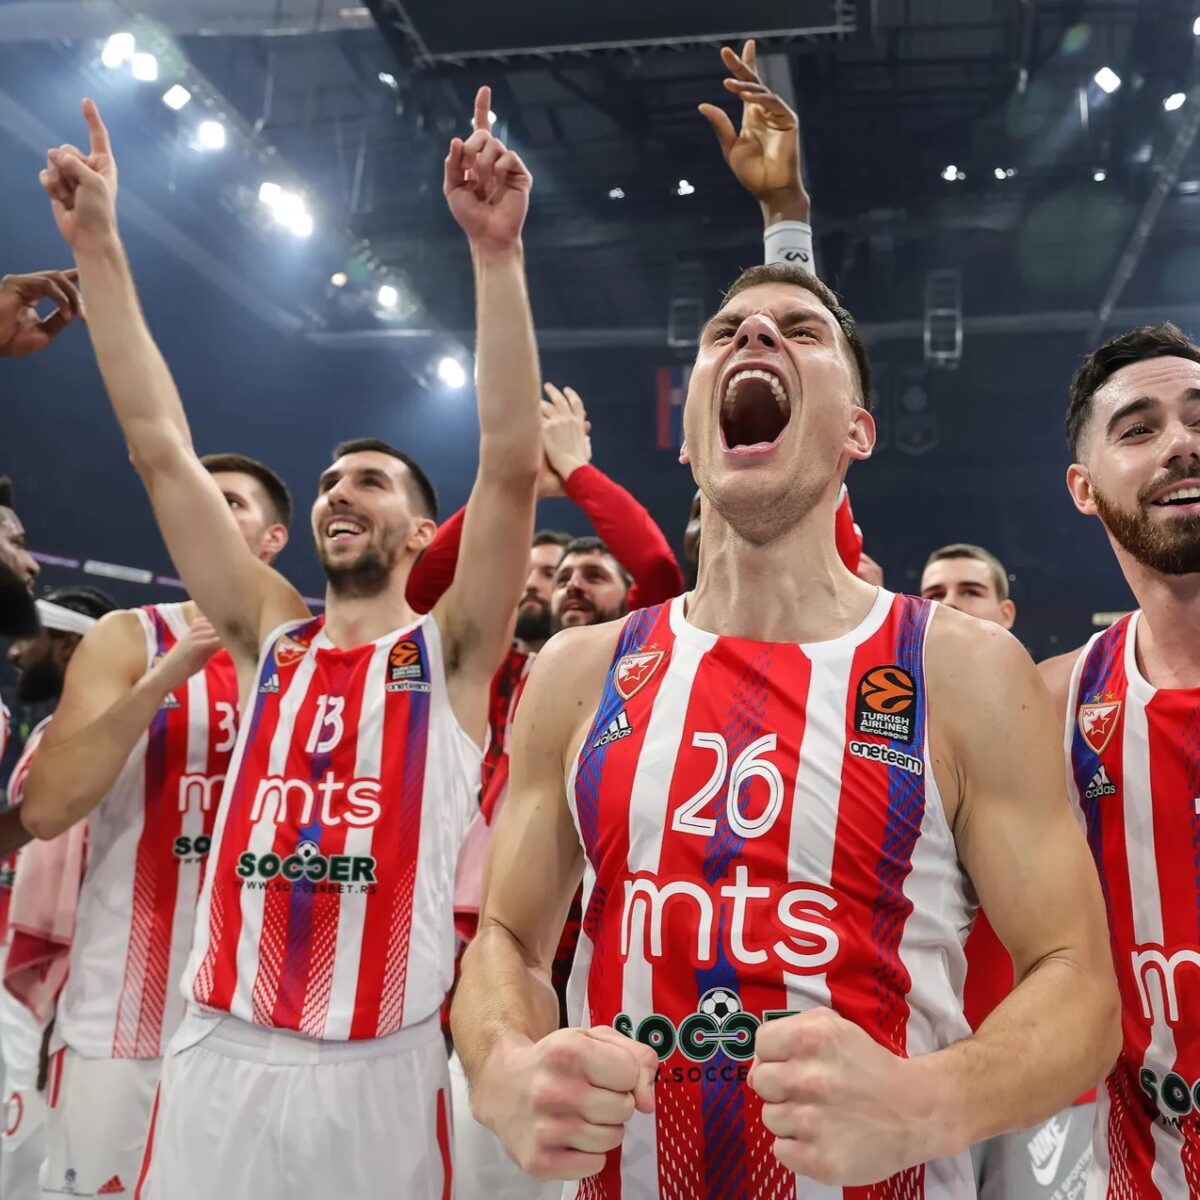 Dusko Ivanovic leads a wildly different looking Crvena Zvezda team in the 2023-24 season of Euroleague Basketball